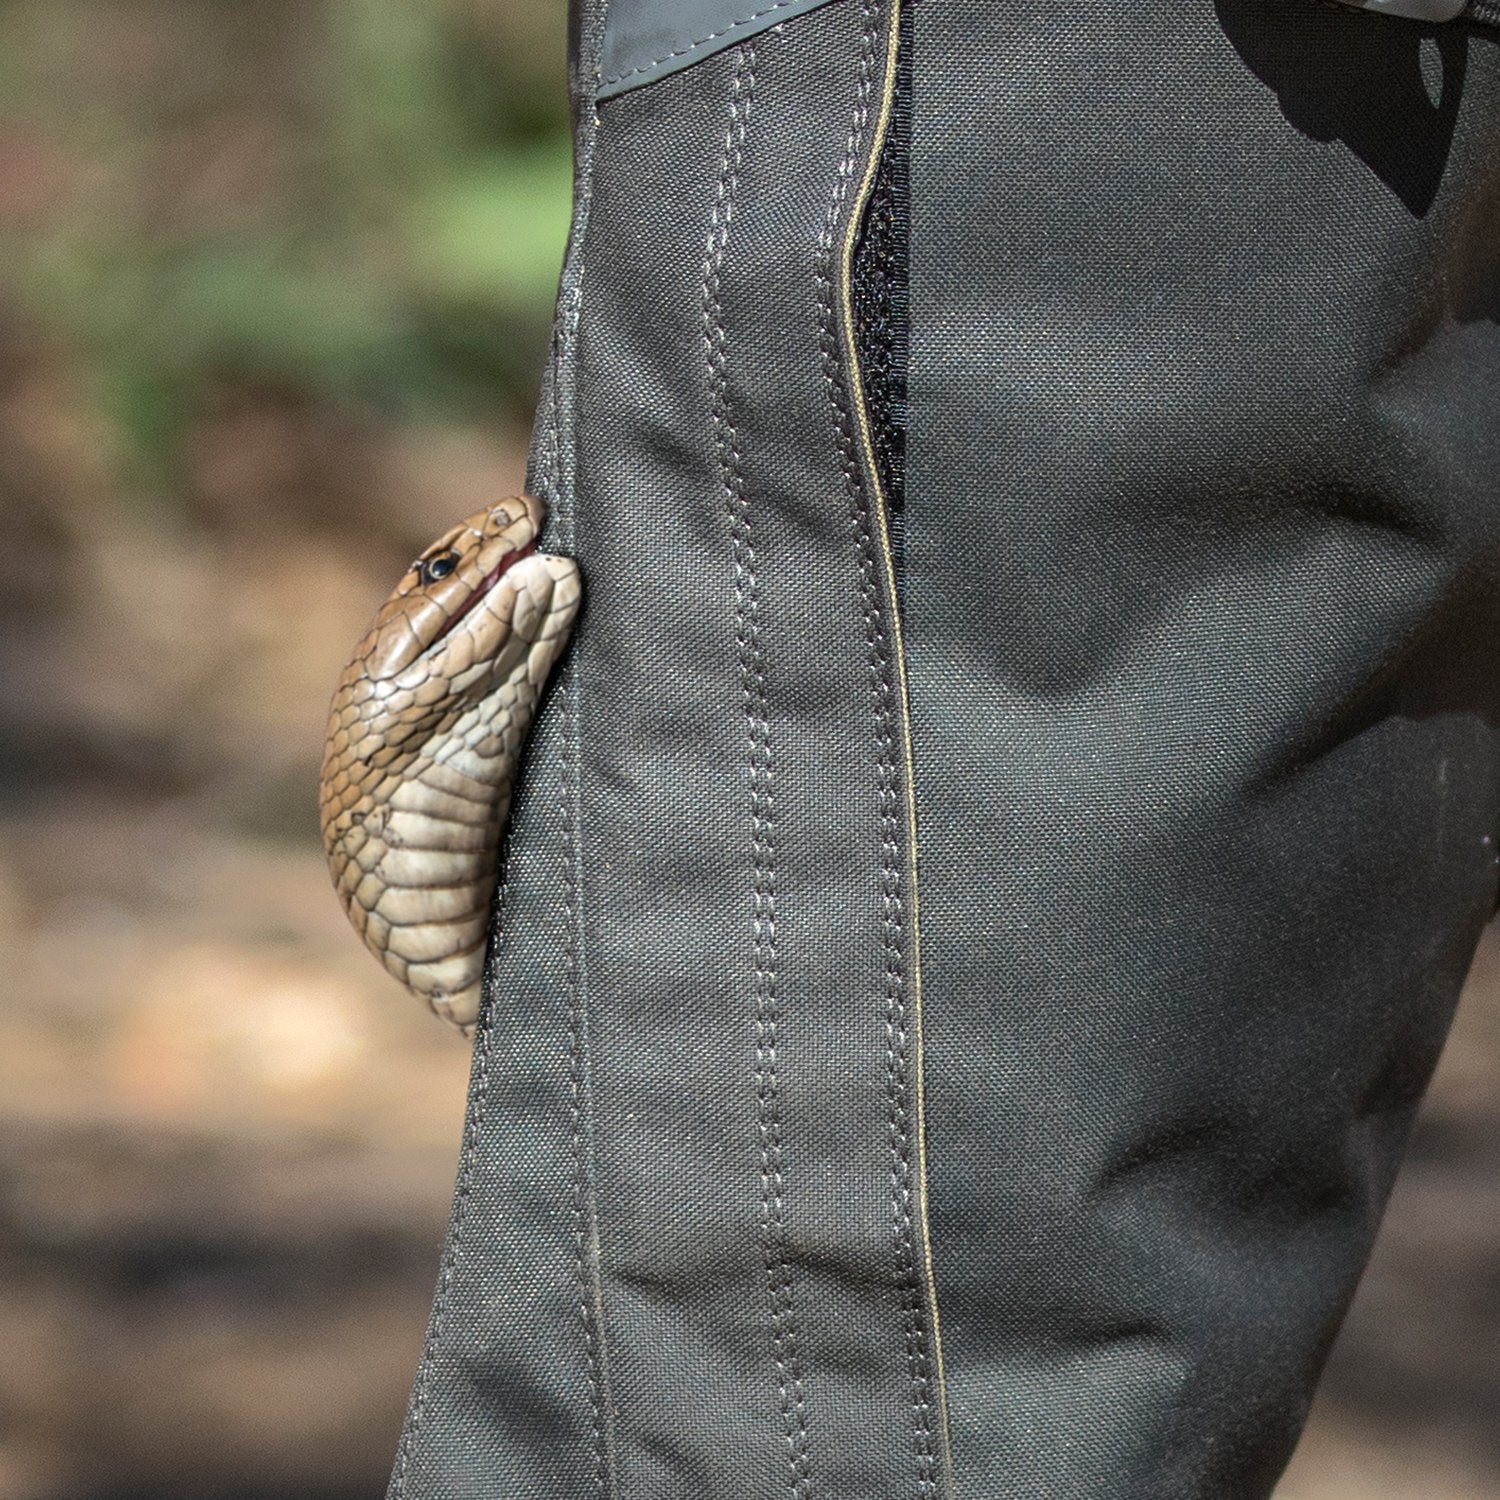 Buy > snake chaps for sale > in stock